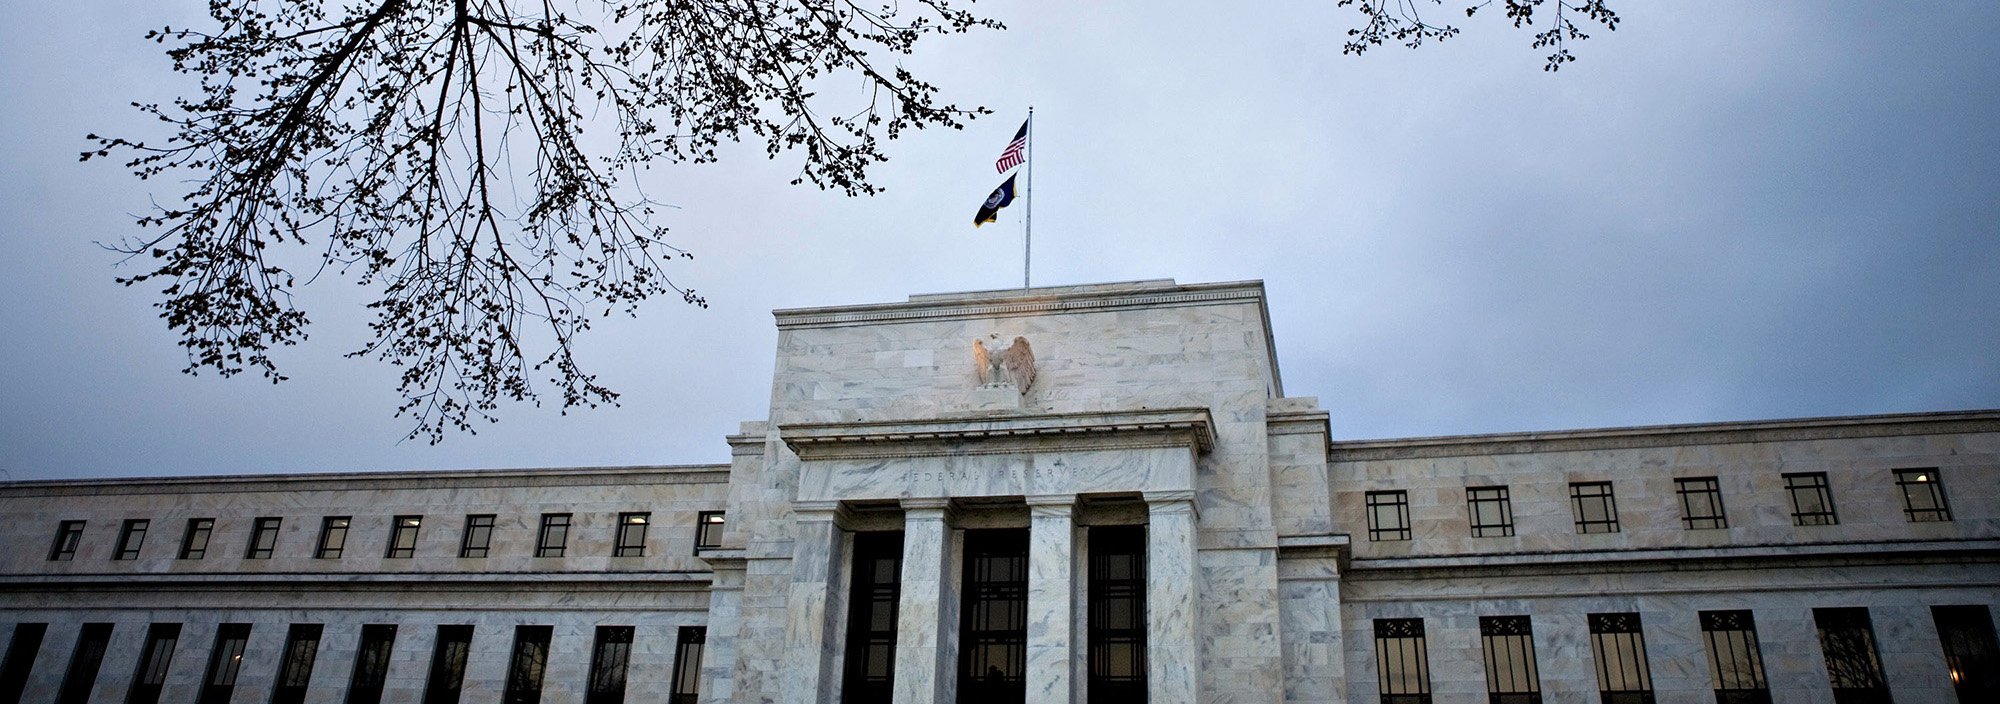 The U.S. Federal Reserve building stands in Washington D.C.